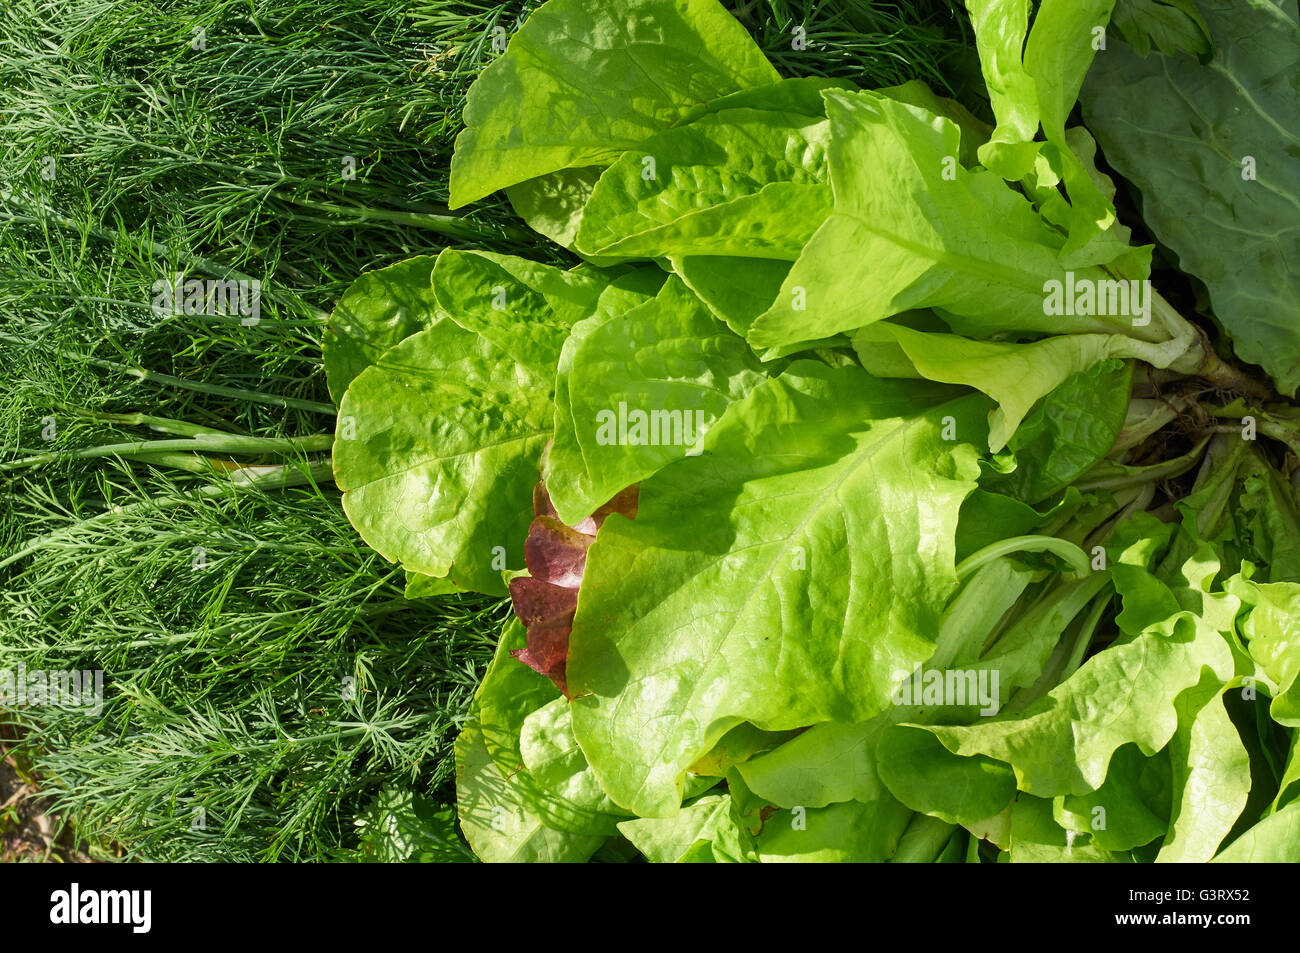 greenery composition of fresh salad, dill and parsley Stock Photo